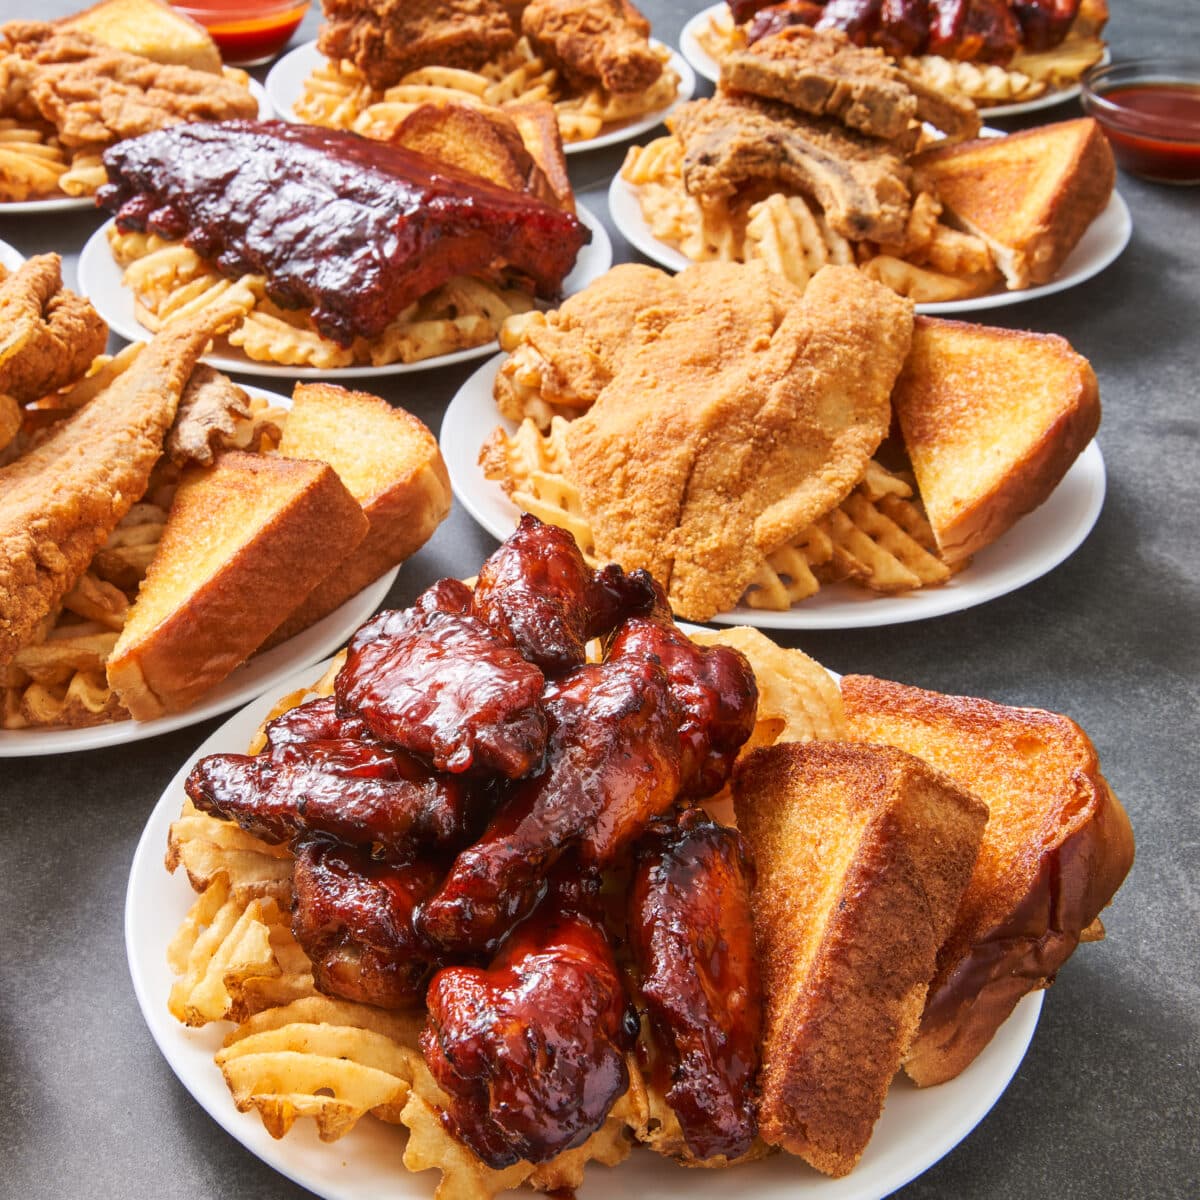 Southern homestyle cooking awaits at This Is It! Southern Kitchen & Bar-B-Q